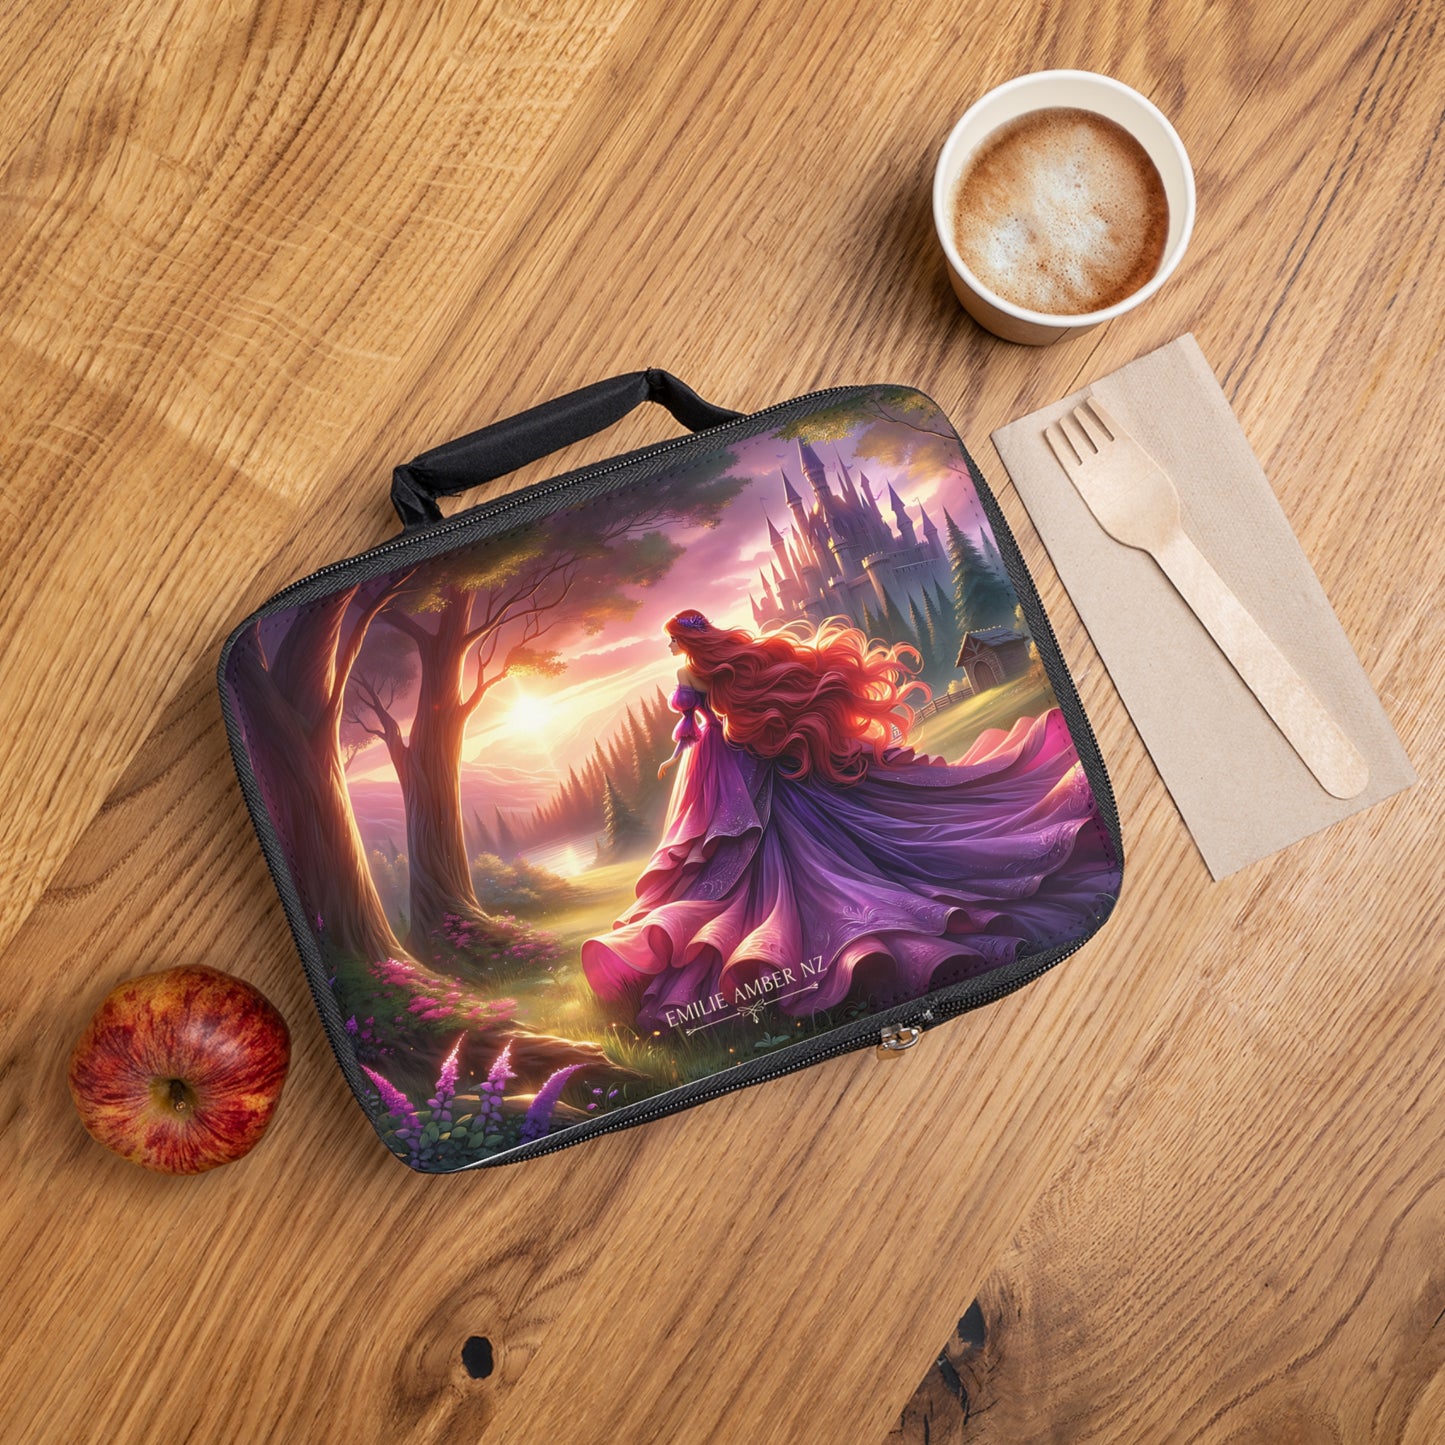 Once Upon A Fantasy - Pink Princess Lunch Bag